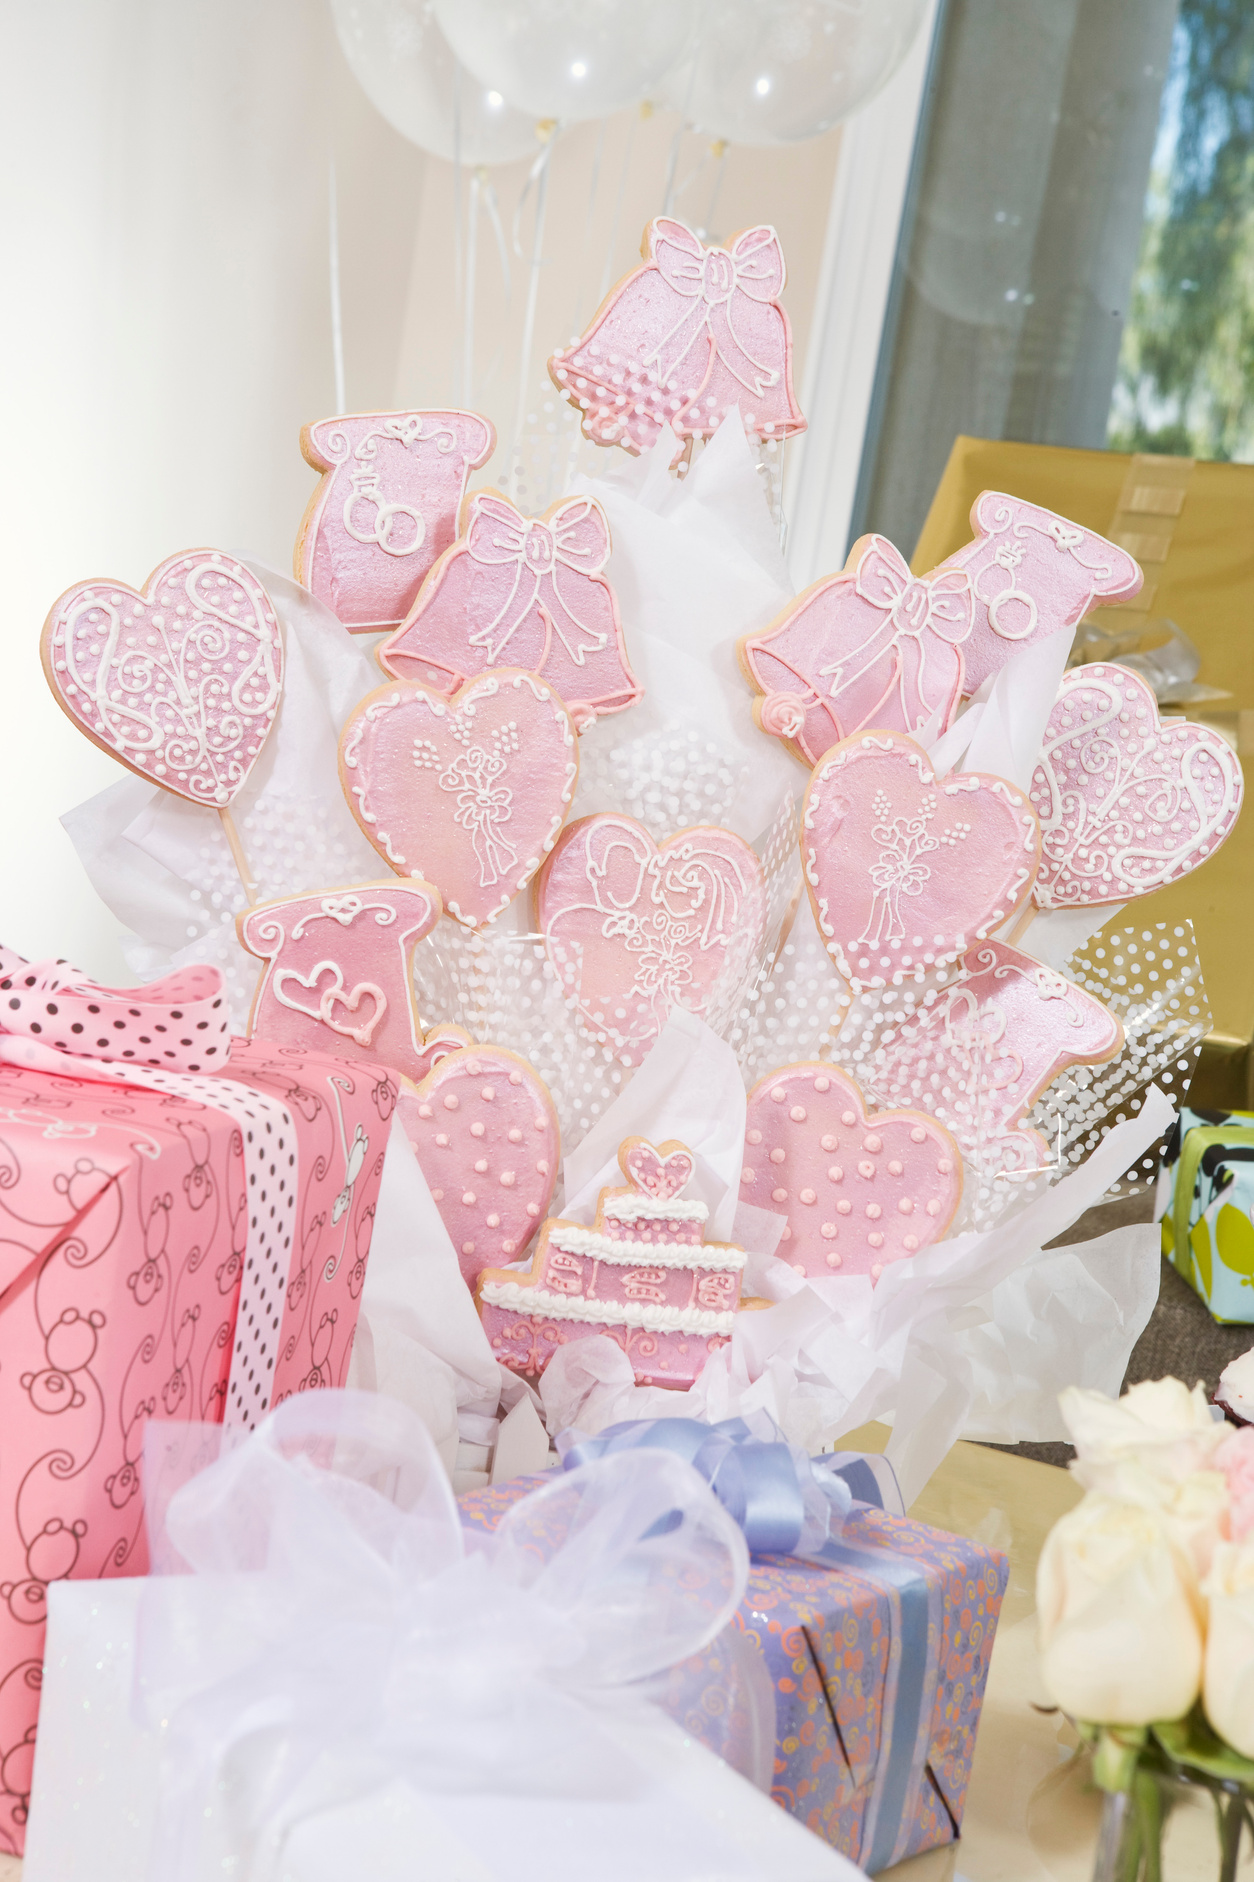 Decoration and presents at bridal shower